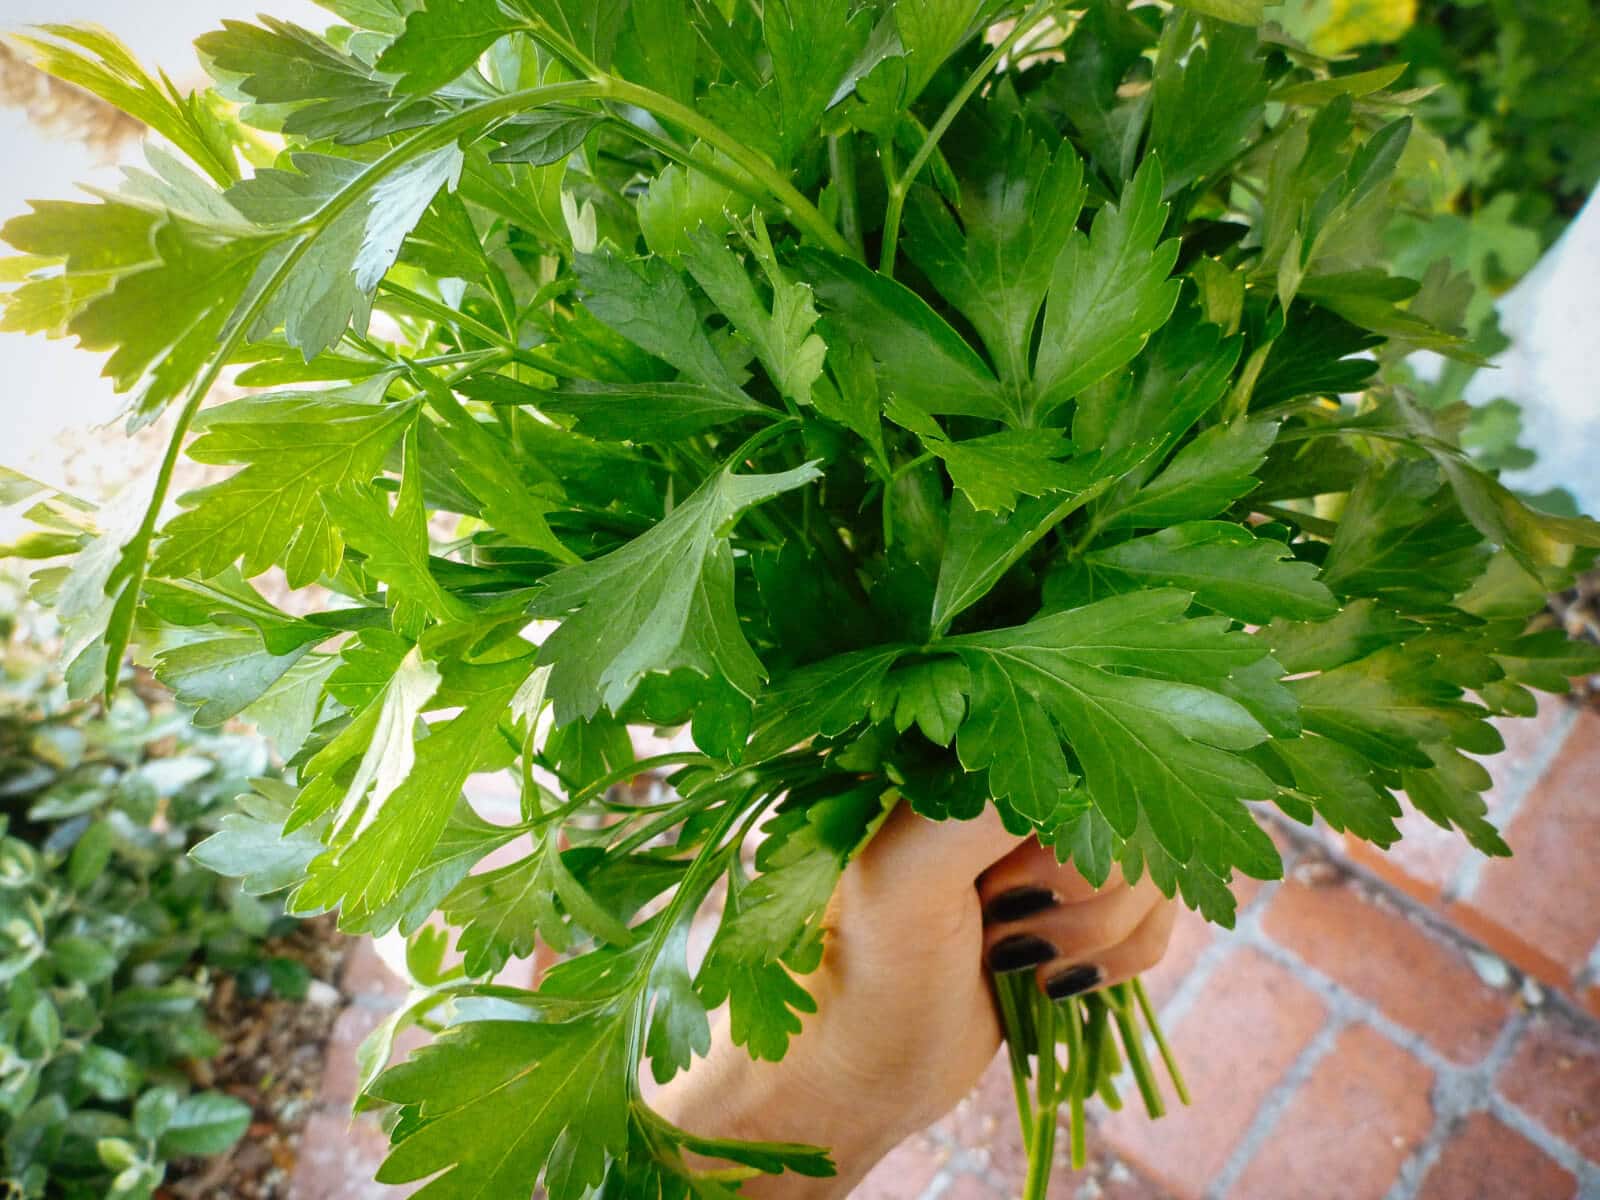 Giant of Italy parsley for making chimichurri